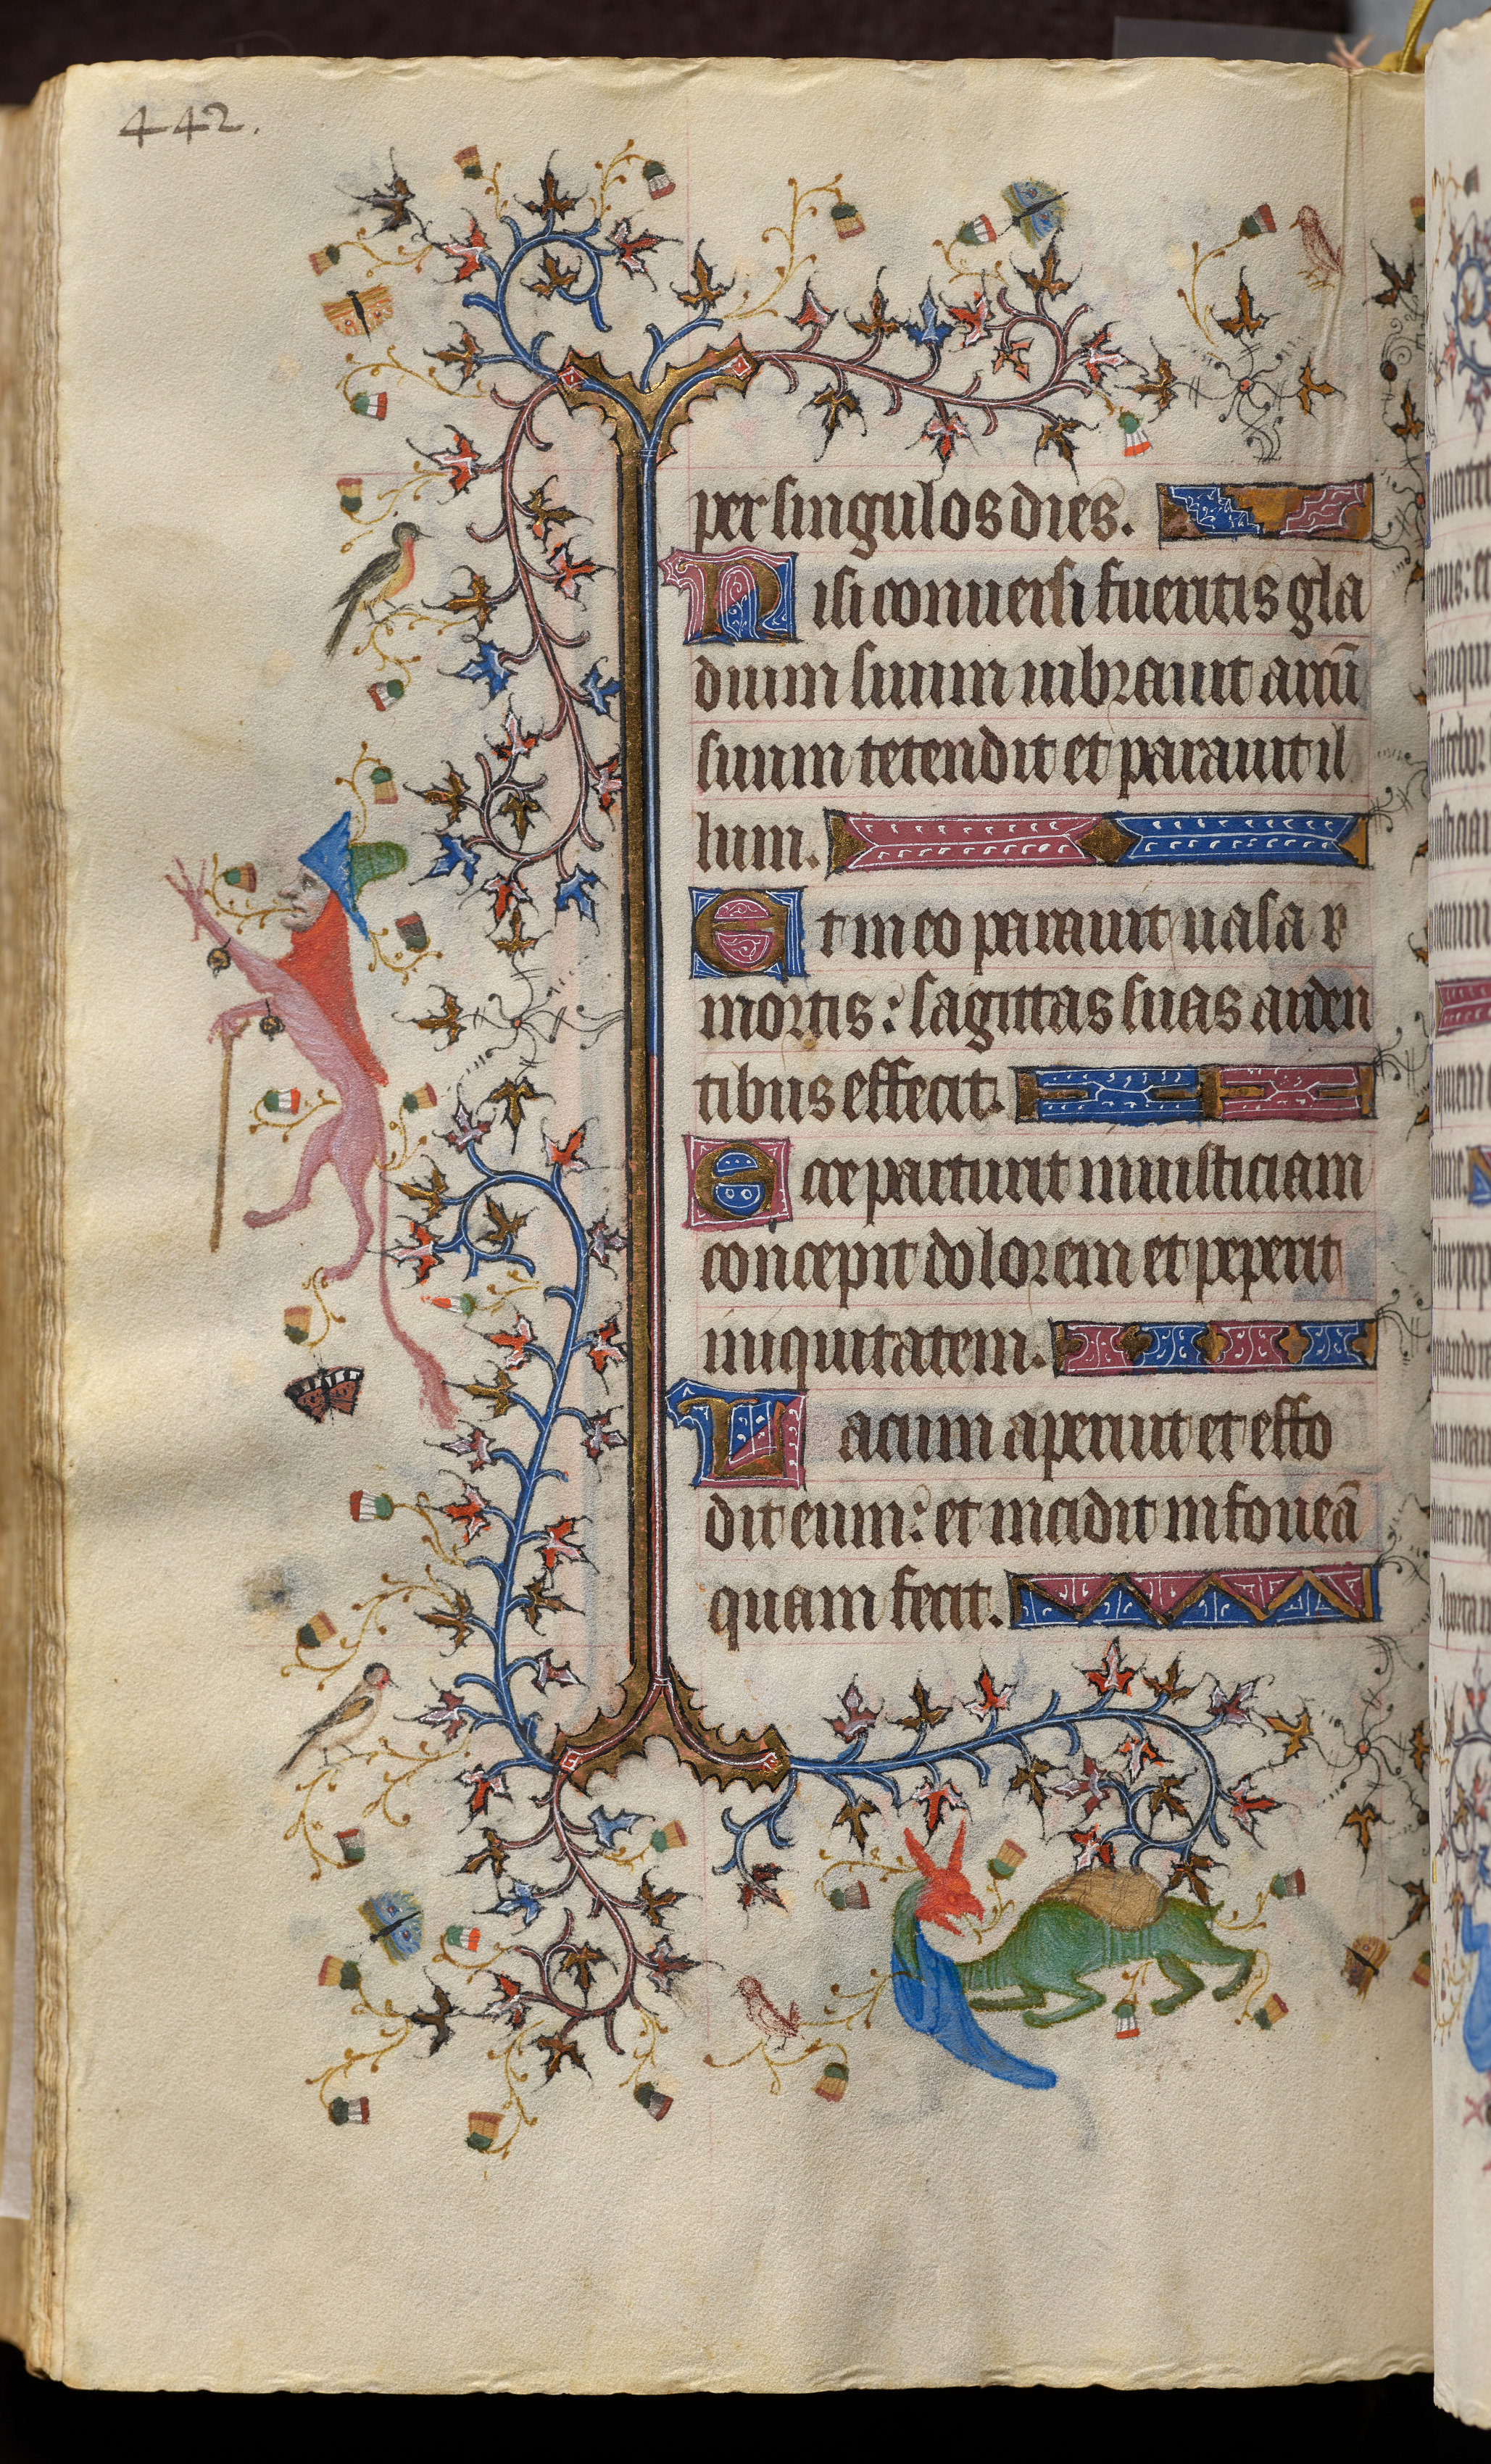 Hours of Charles the Noble, King of Navarre (1361-1425): fol. 215v, Text